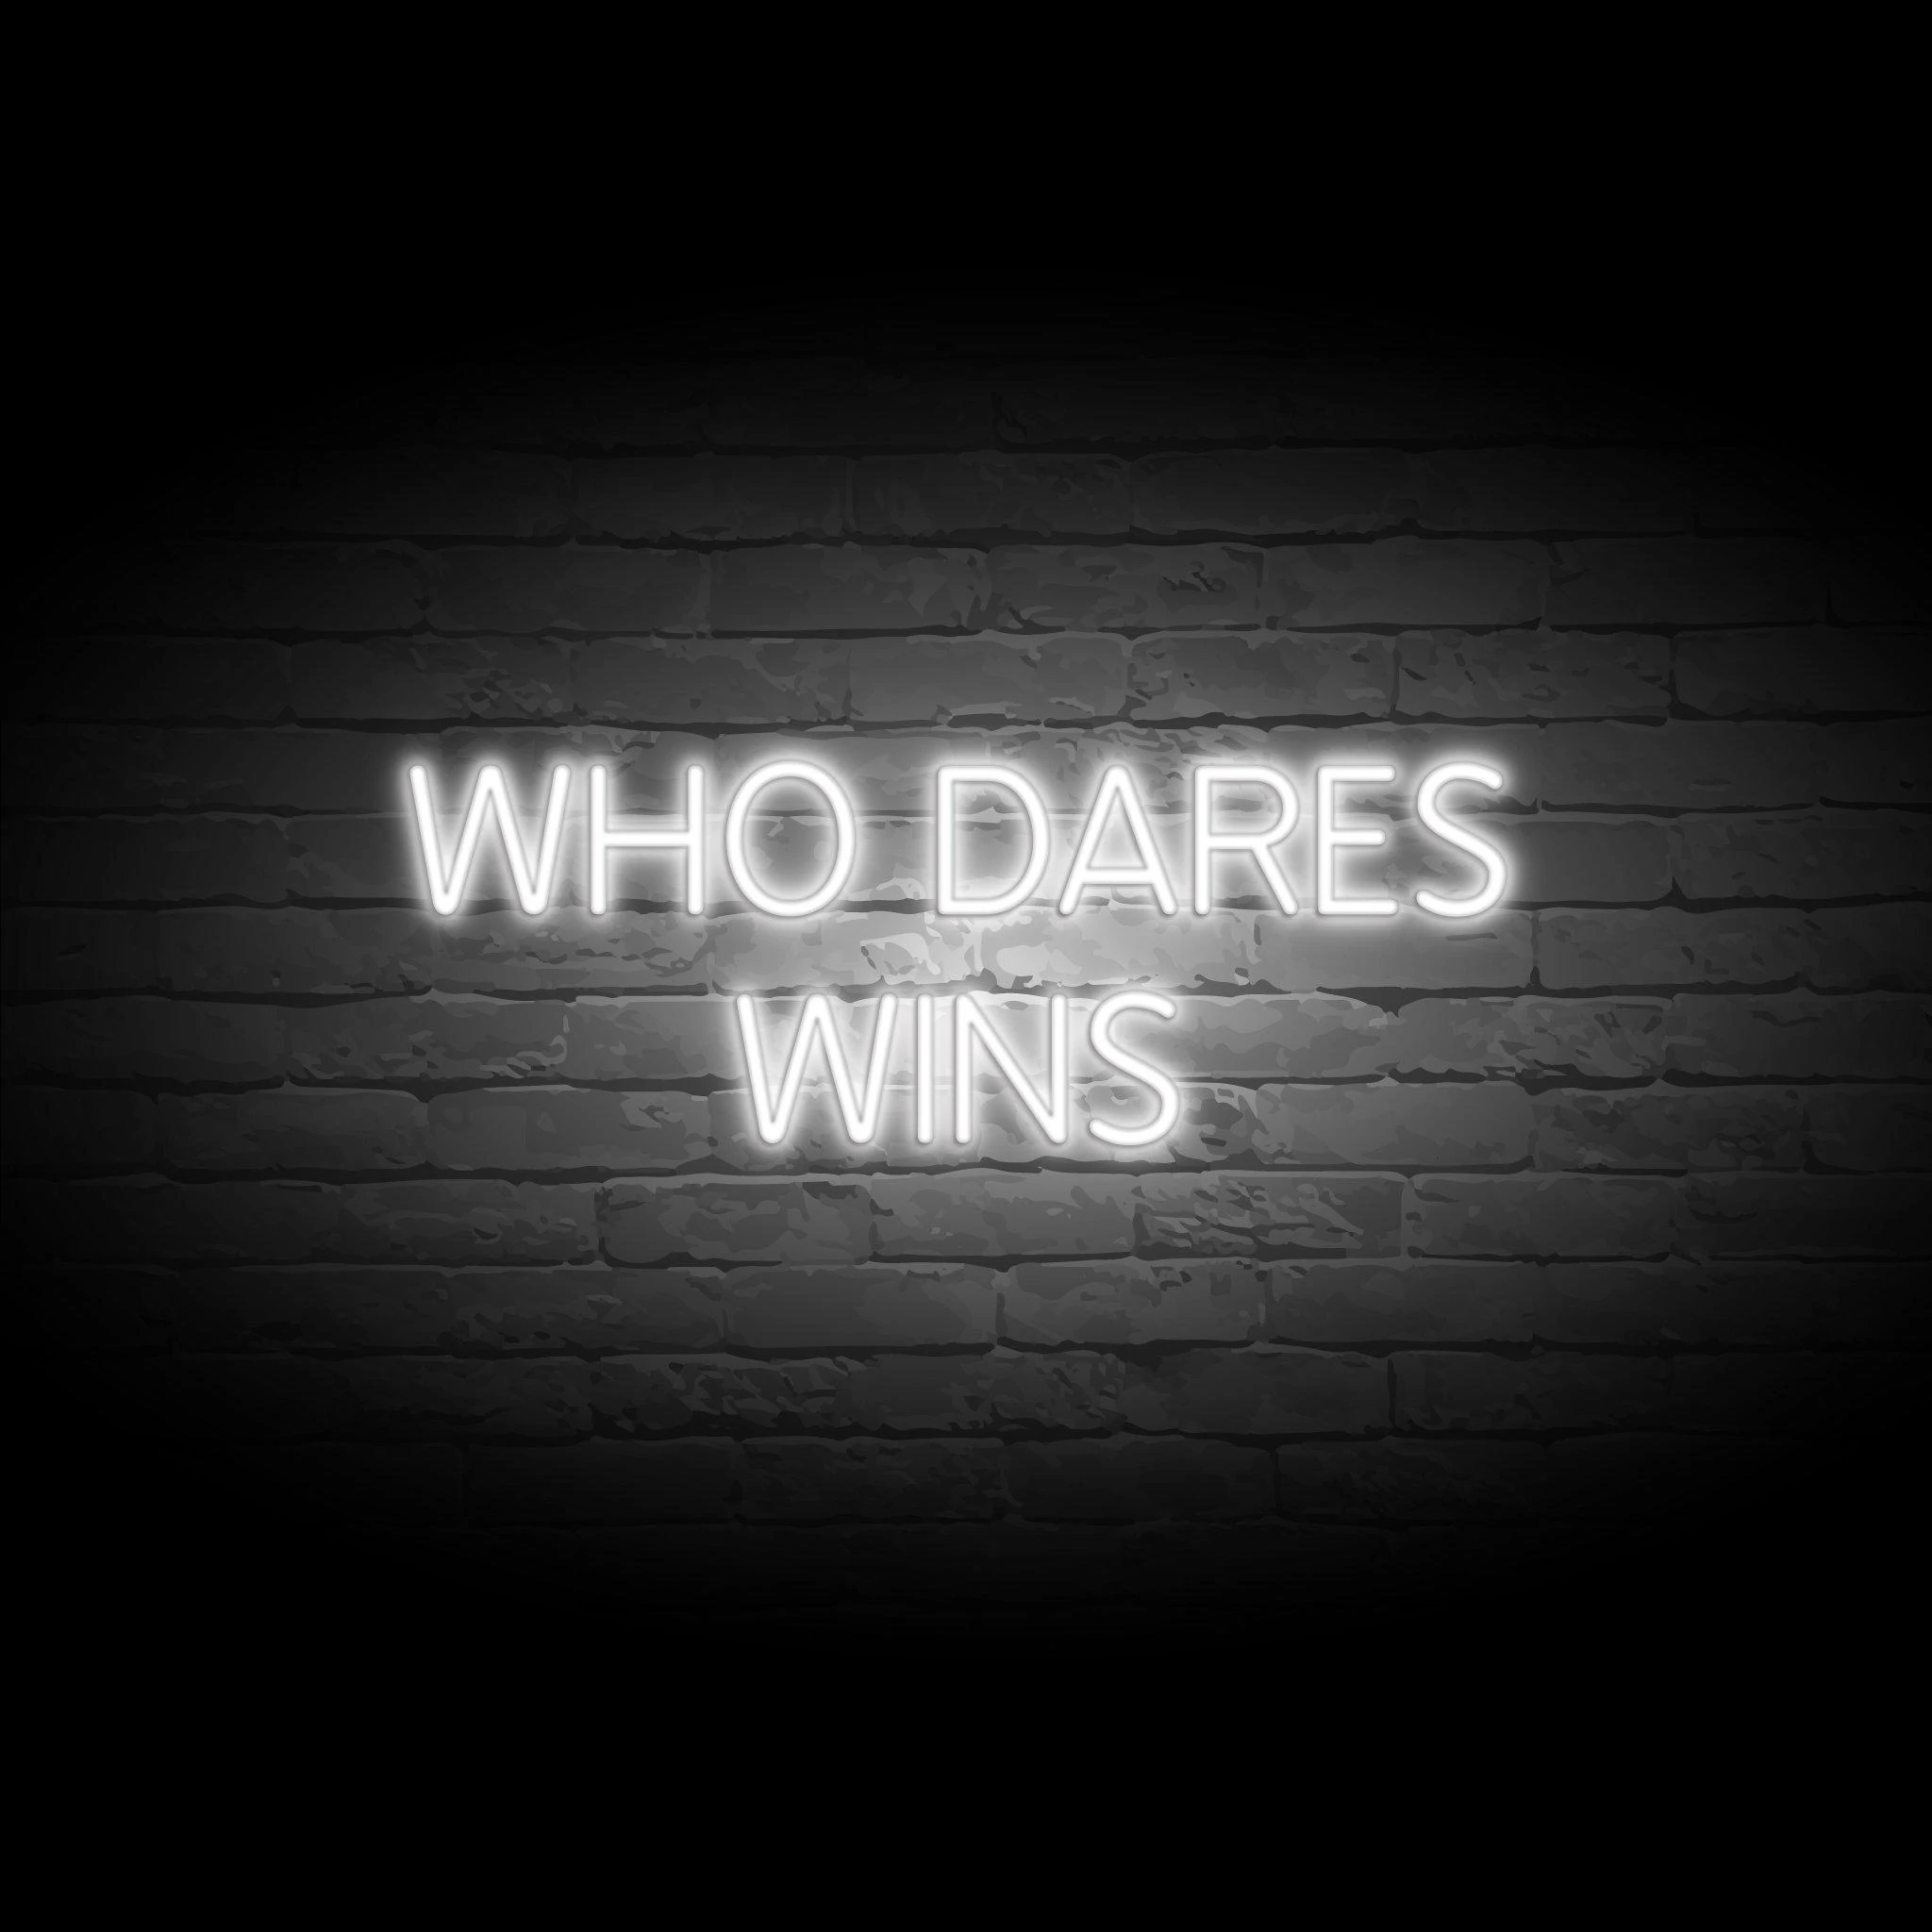 'WHO DARES WINS' NEON SIGN - NeonFerry